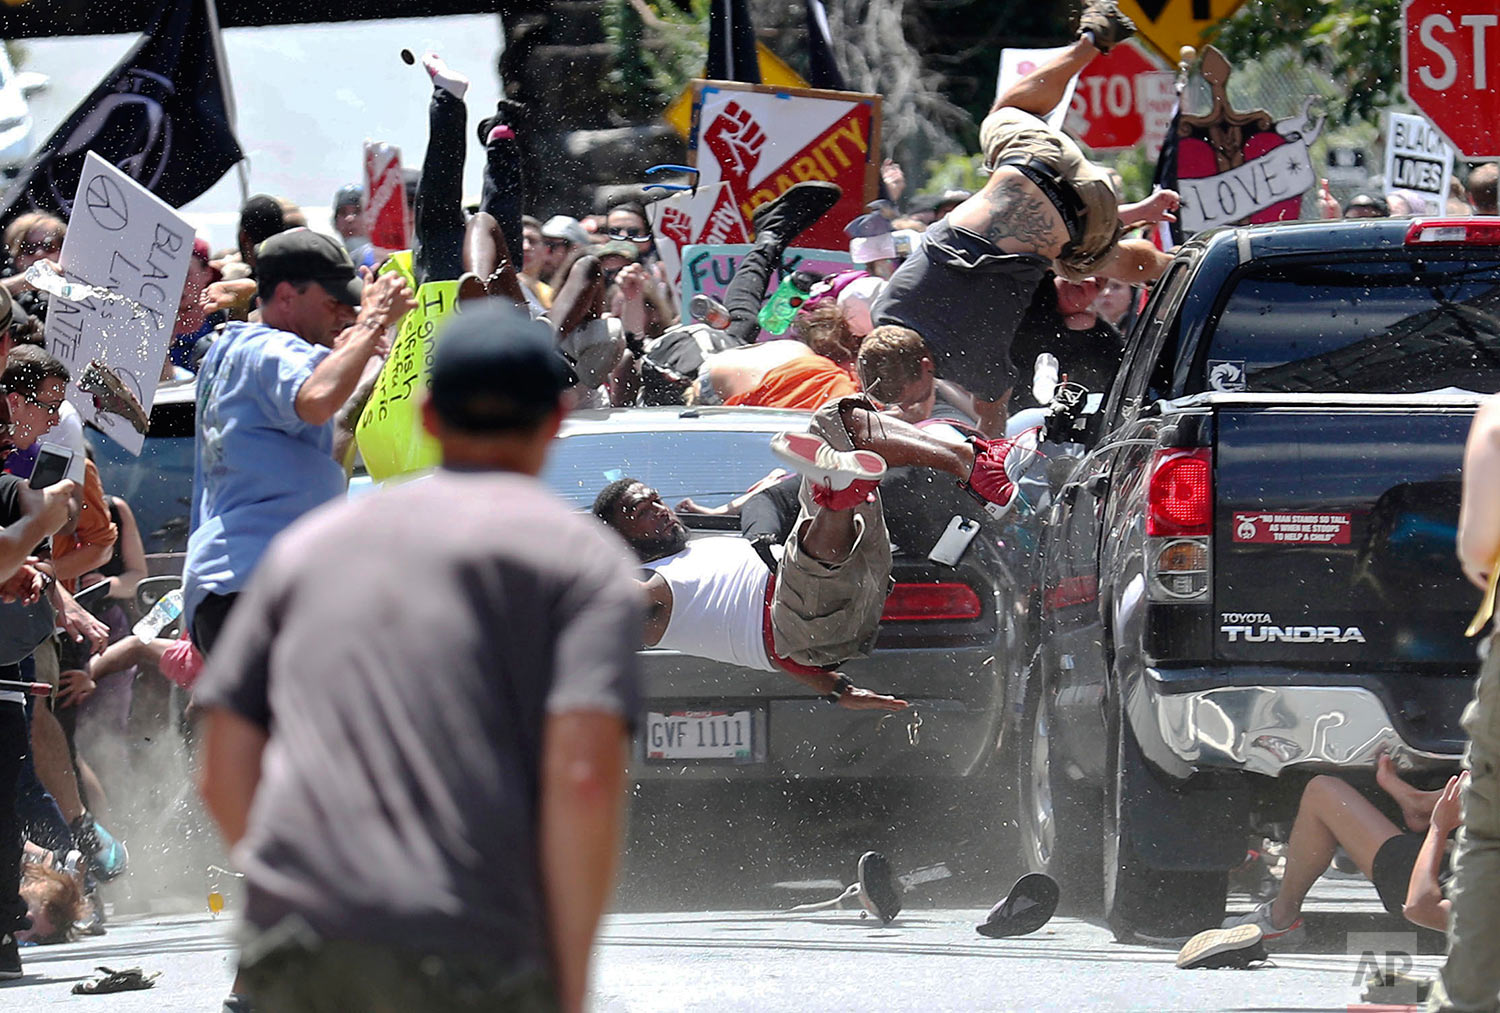  People fly into the air as a vehicle drives into a group of protesters demonstrating against a white nationalist rally in Charlottesville, Va., Saturday, Aug. 12, 2017.  (Ryan M. Kelly/The Daily Progress via AP) 